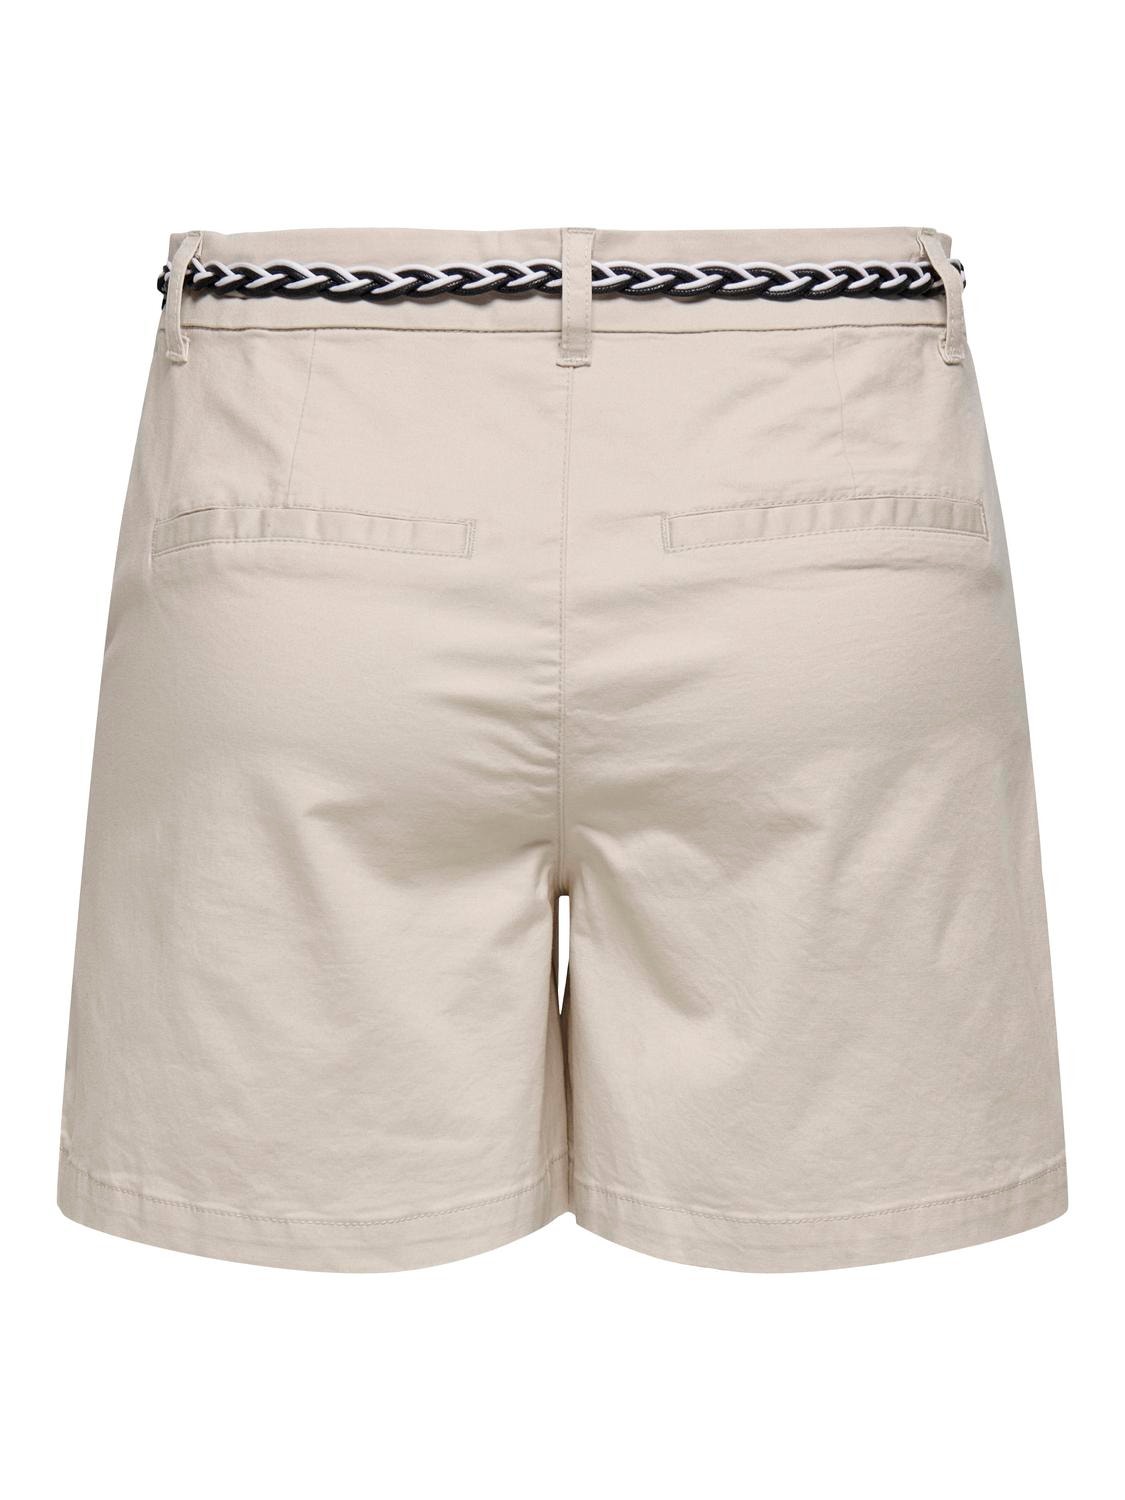 ONLY Normal geschnitten Hohe Taille Shorts -Pumice Stone - 15322835